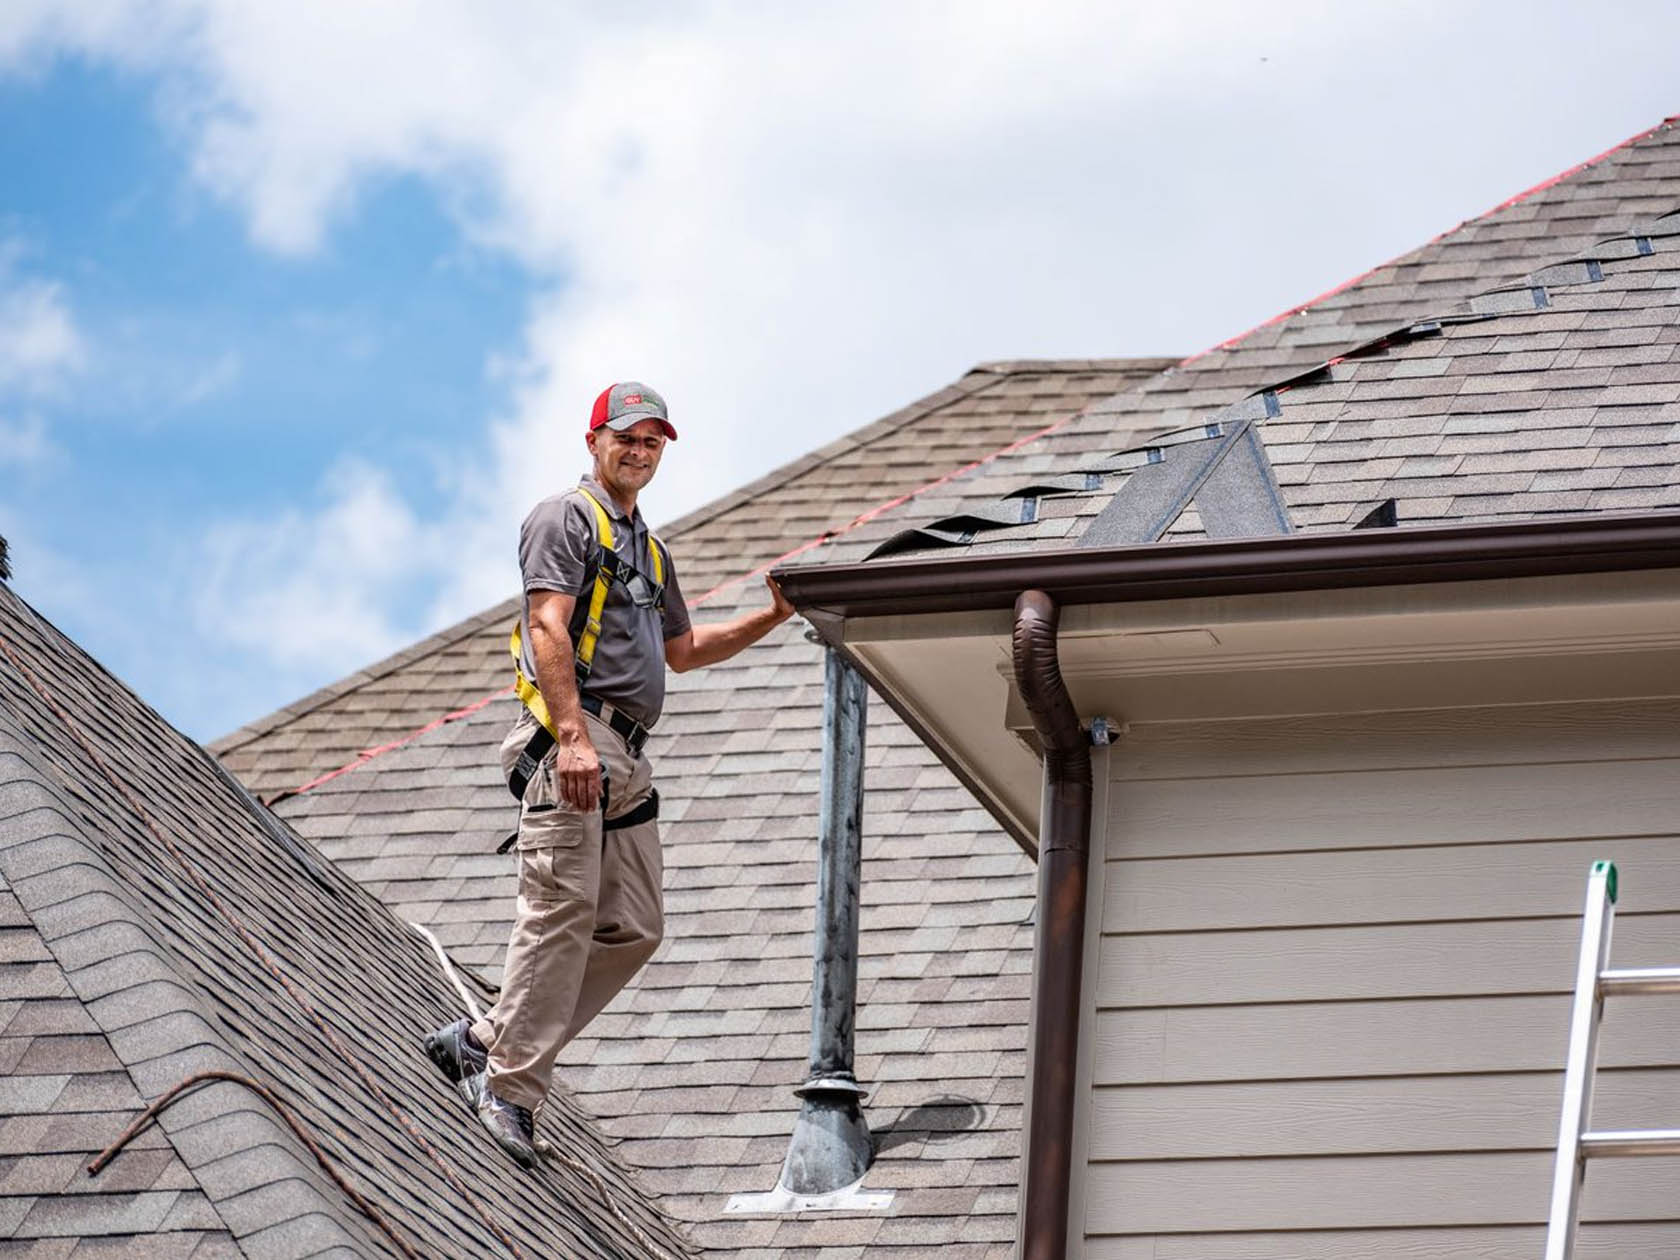 Key Factors to Consider When Hiring a Roofing Contractor